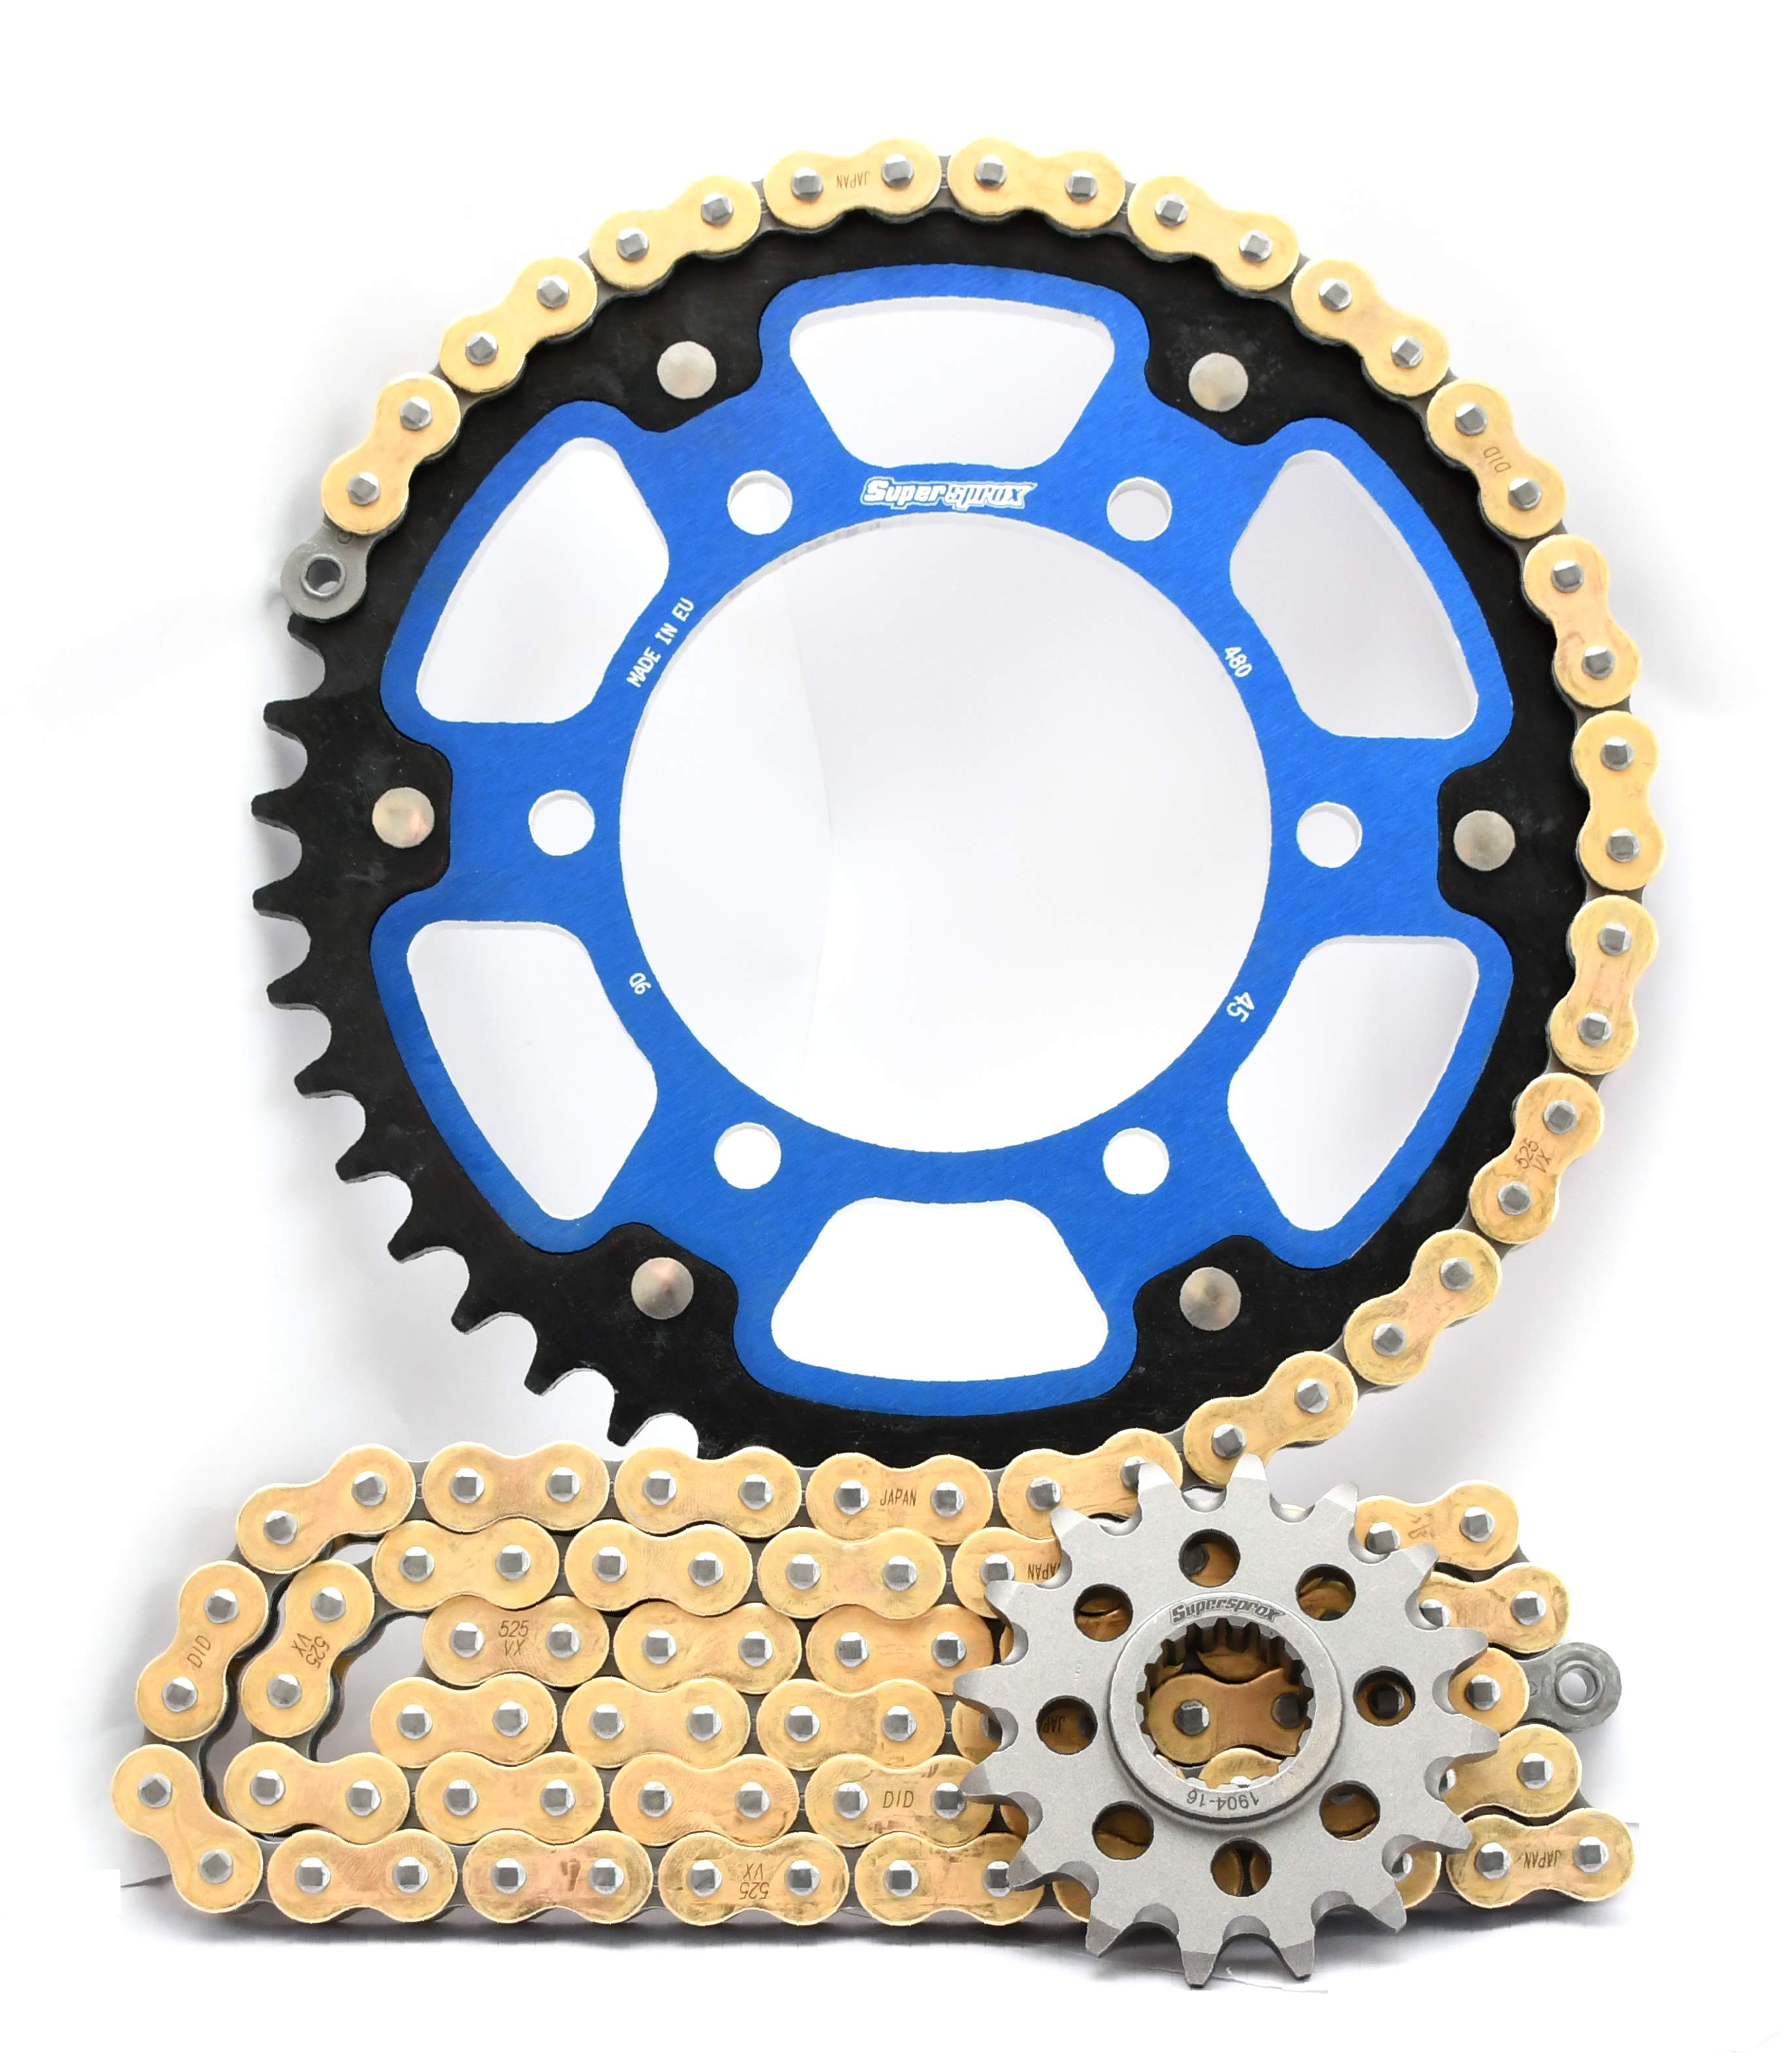 Supersprox Chain & Sprocket Kit for Yamaha Tenere 700 2019> - Standard Gearing